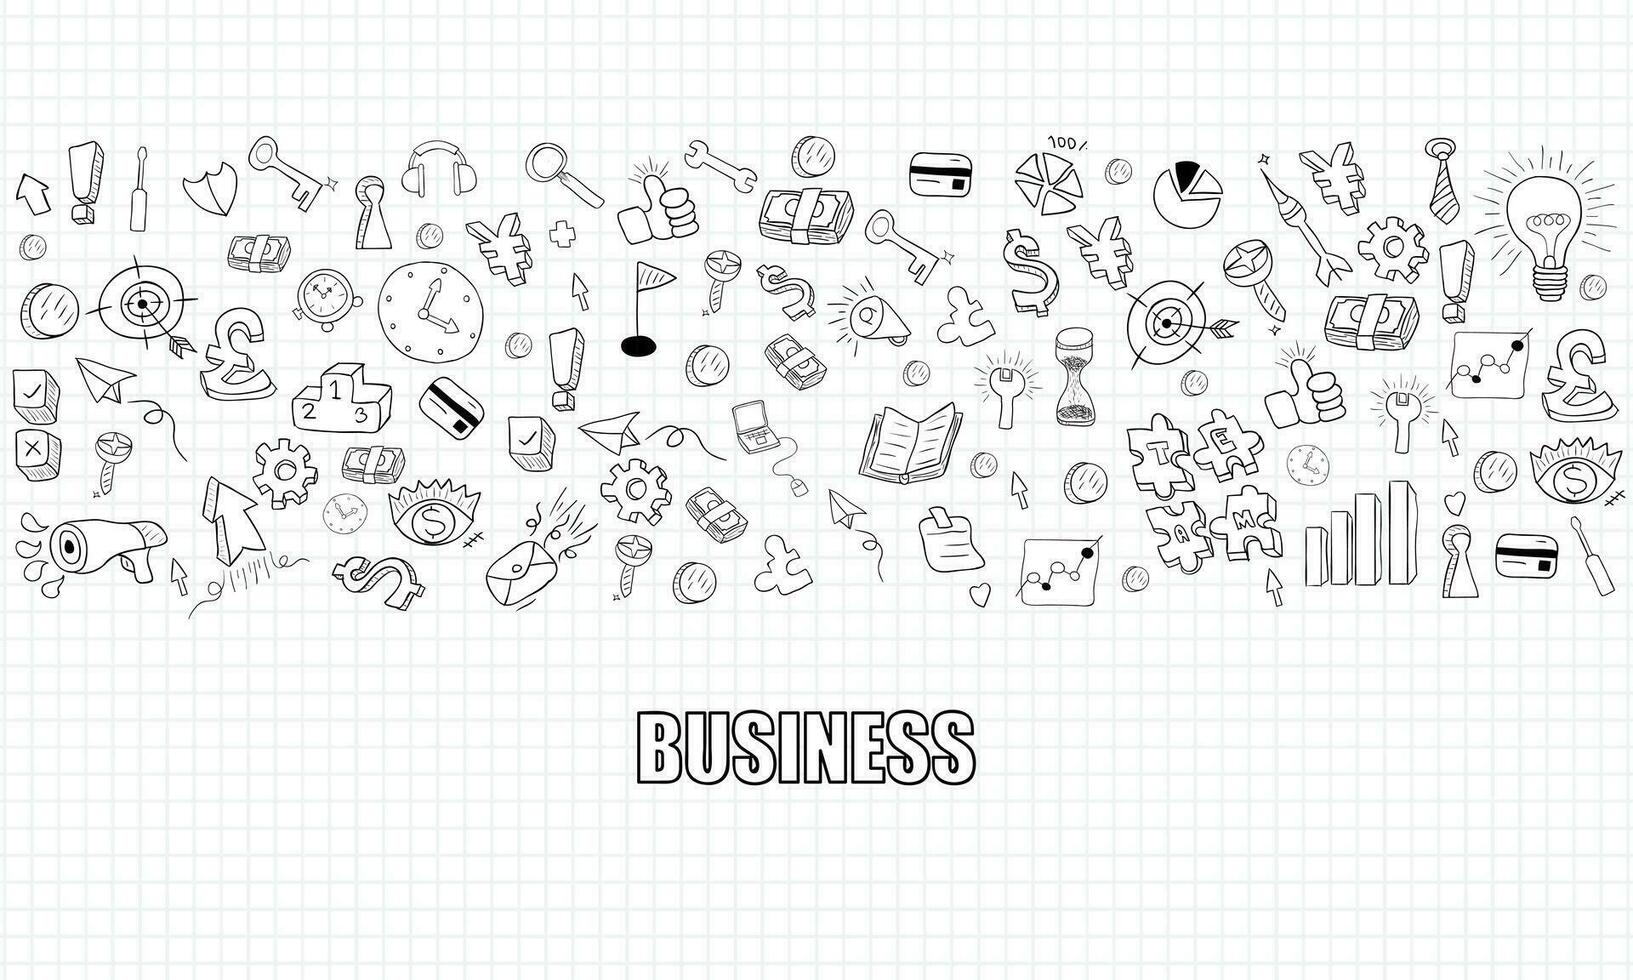 business planning doodles objects background., drawing by hand vector